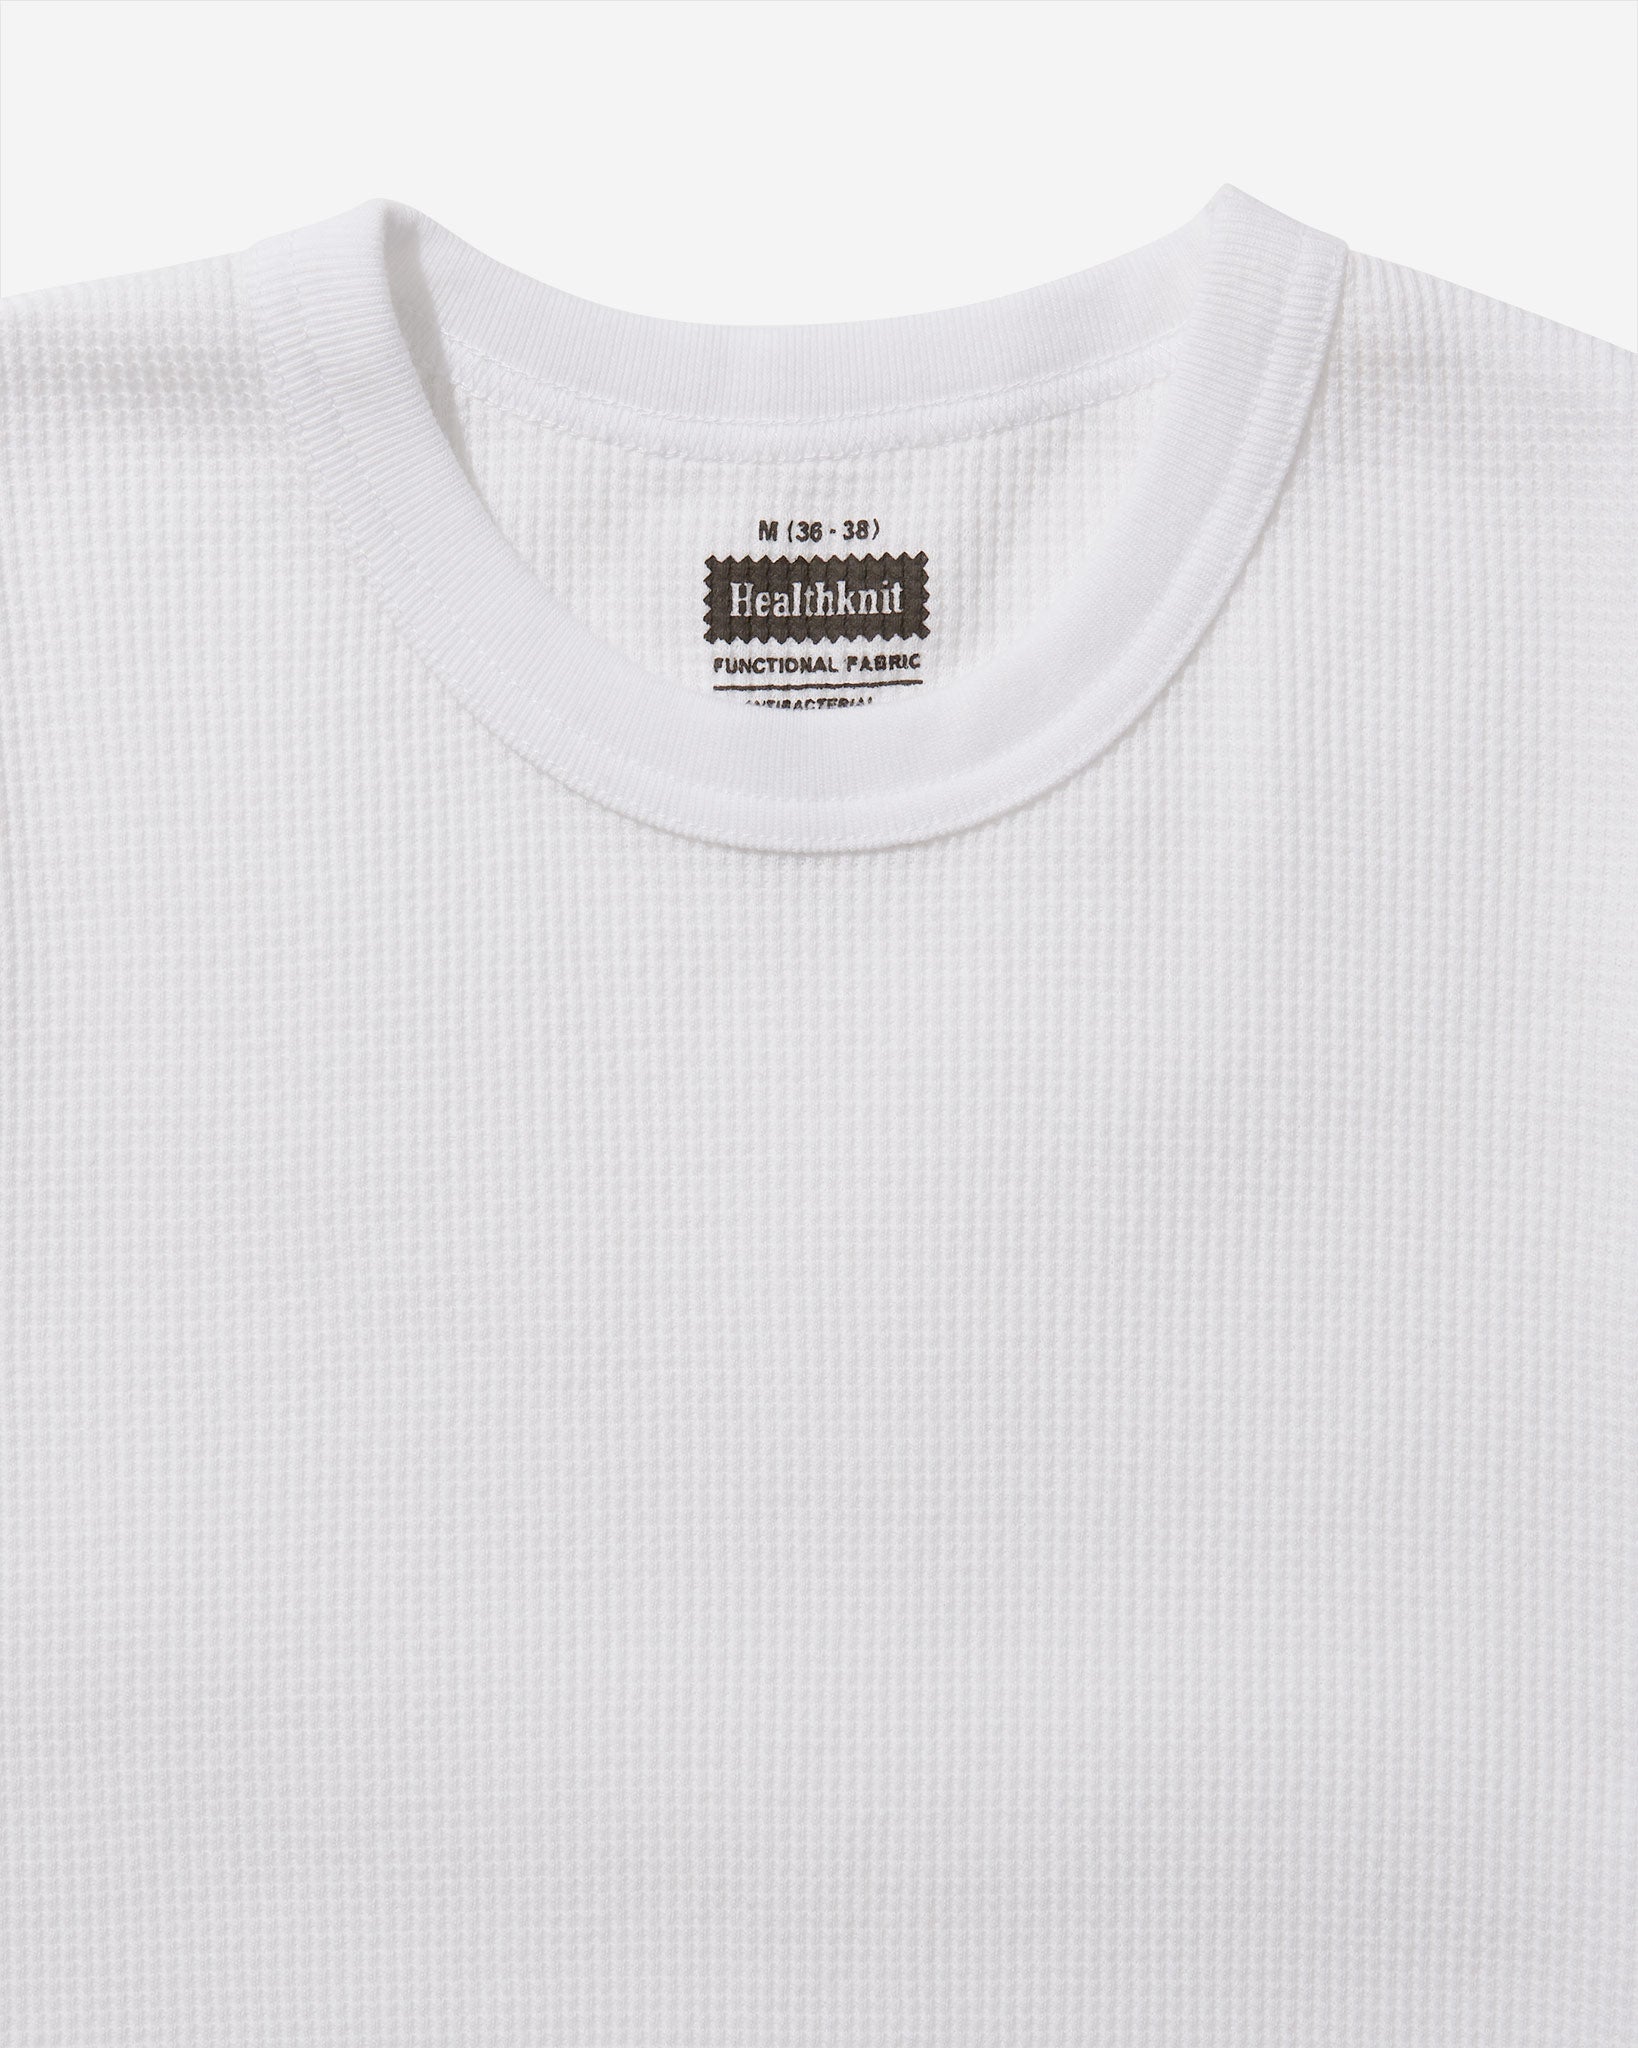 Functional Fabric Waffle L/S T-Shirt - White